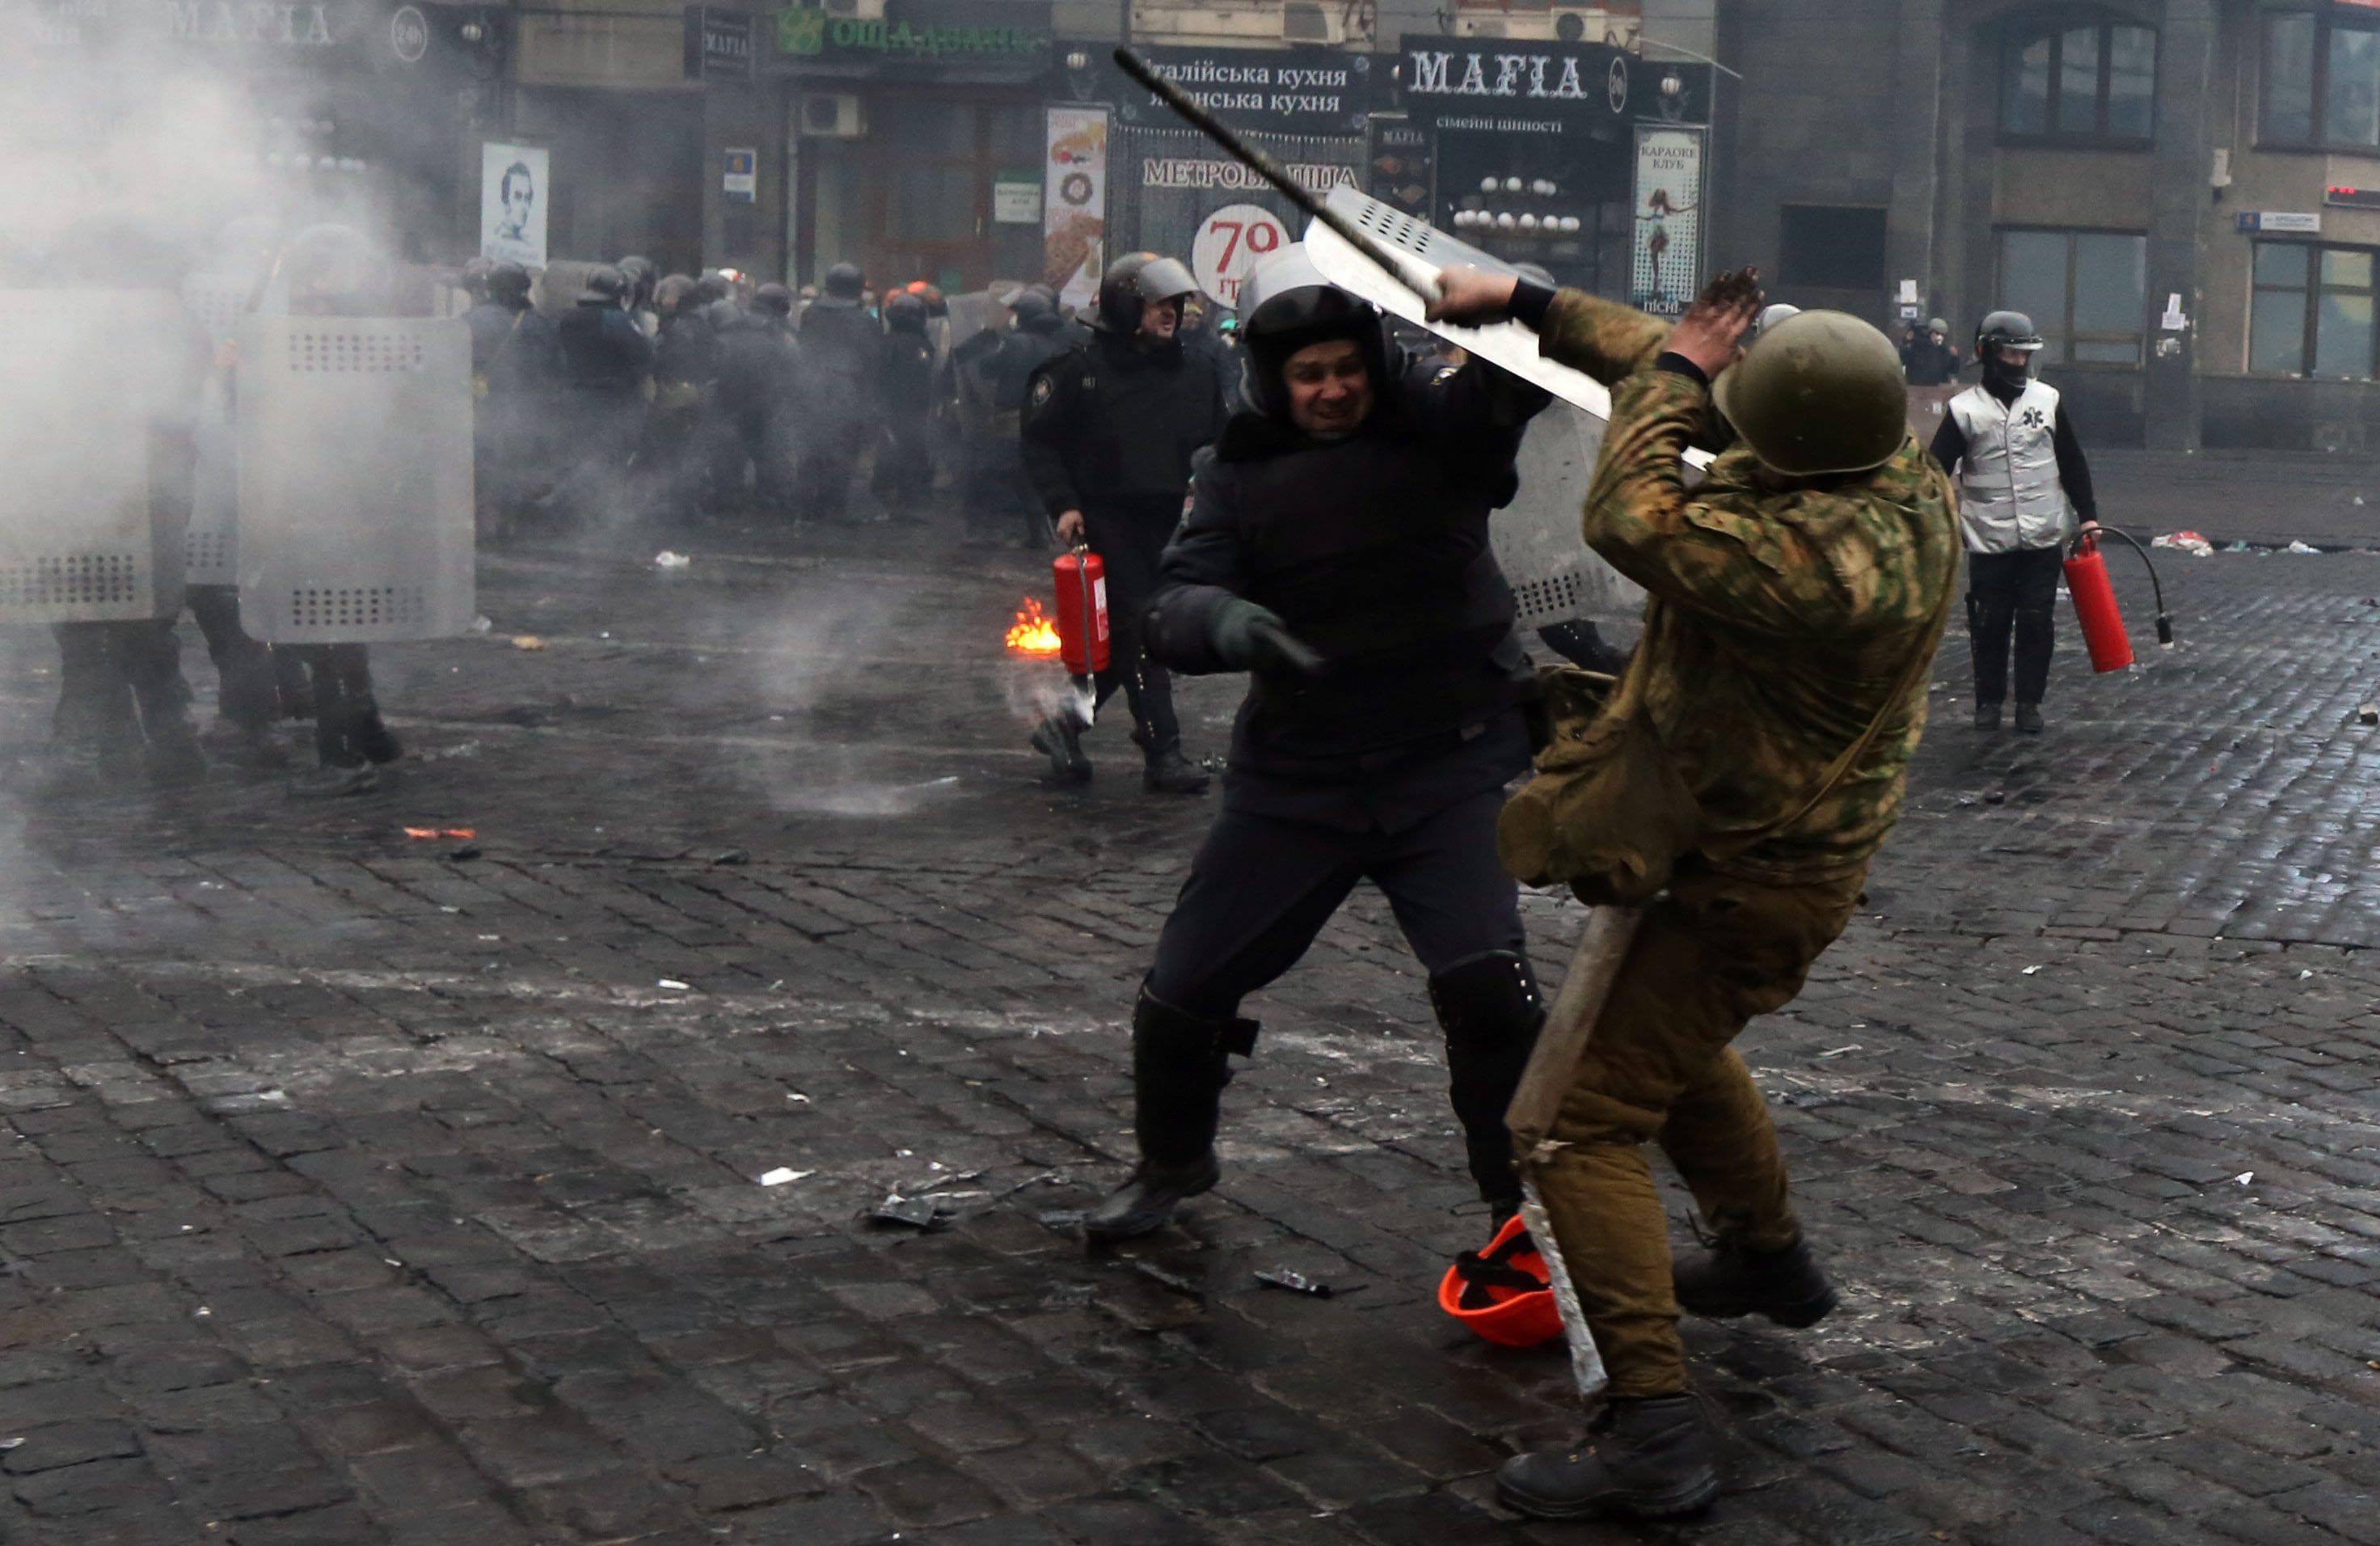 Protesters clash with police in central Kiev, Ukraine, on Thursday.